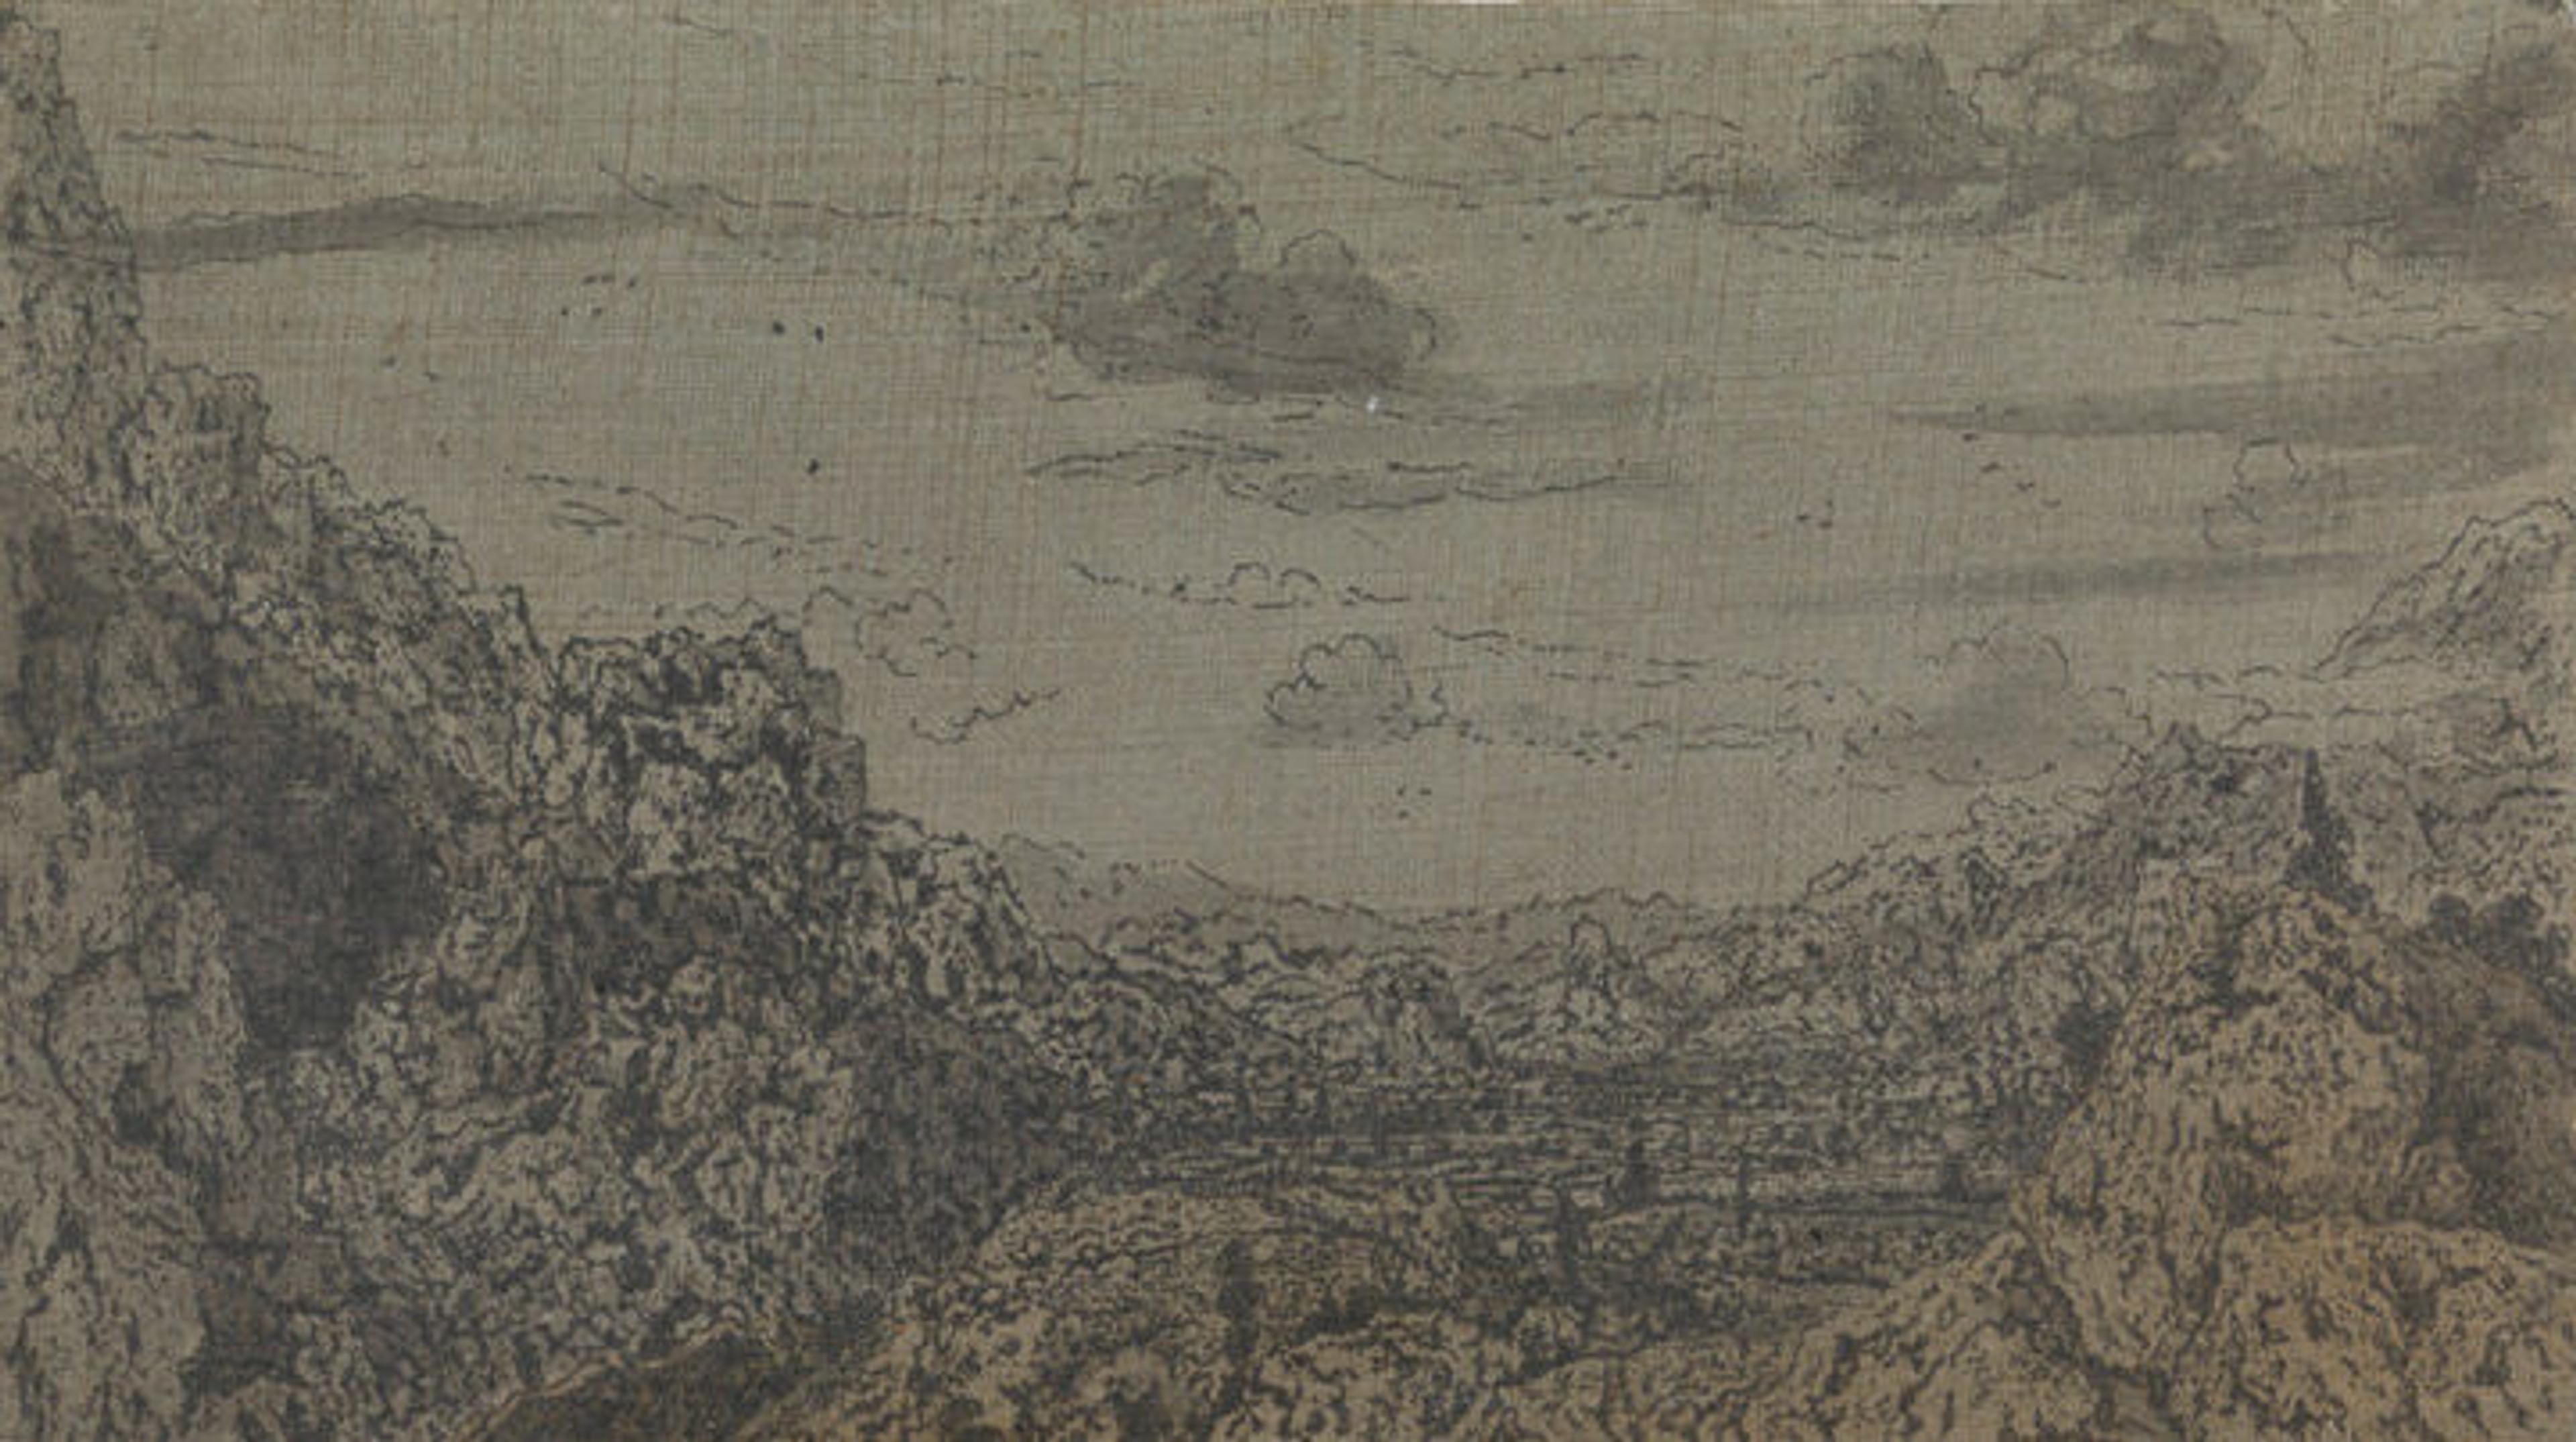 Line etching depicting a valley and sky